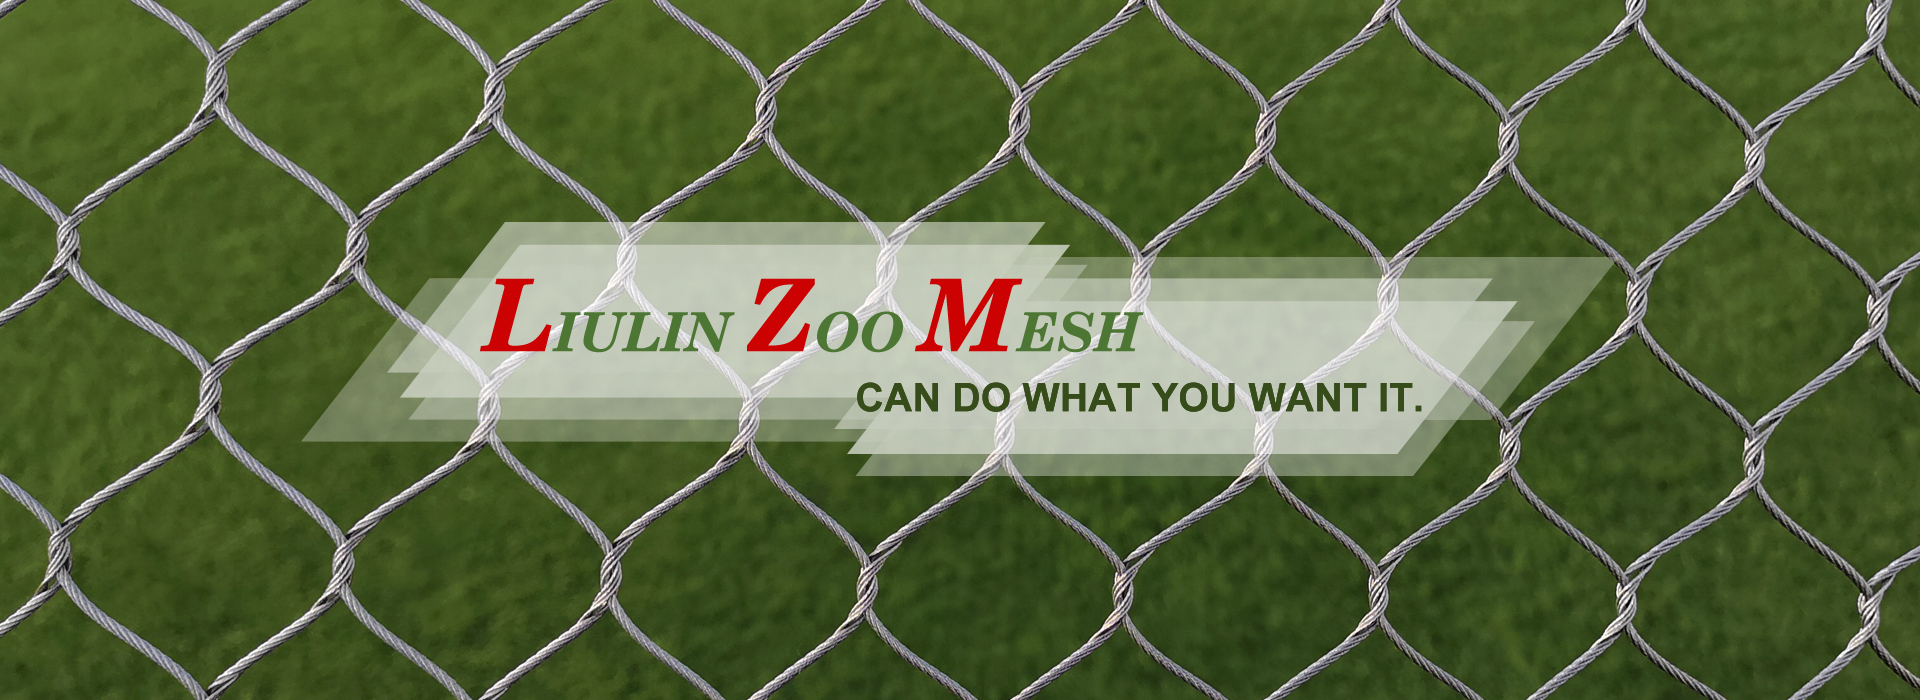 Stainless steel zoo mesh make a safe home for animals